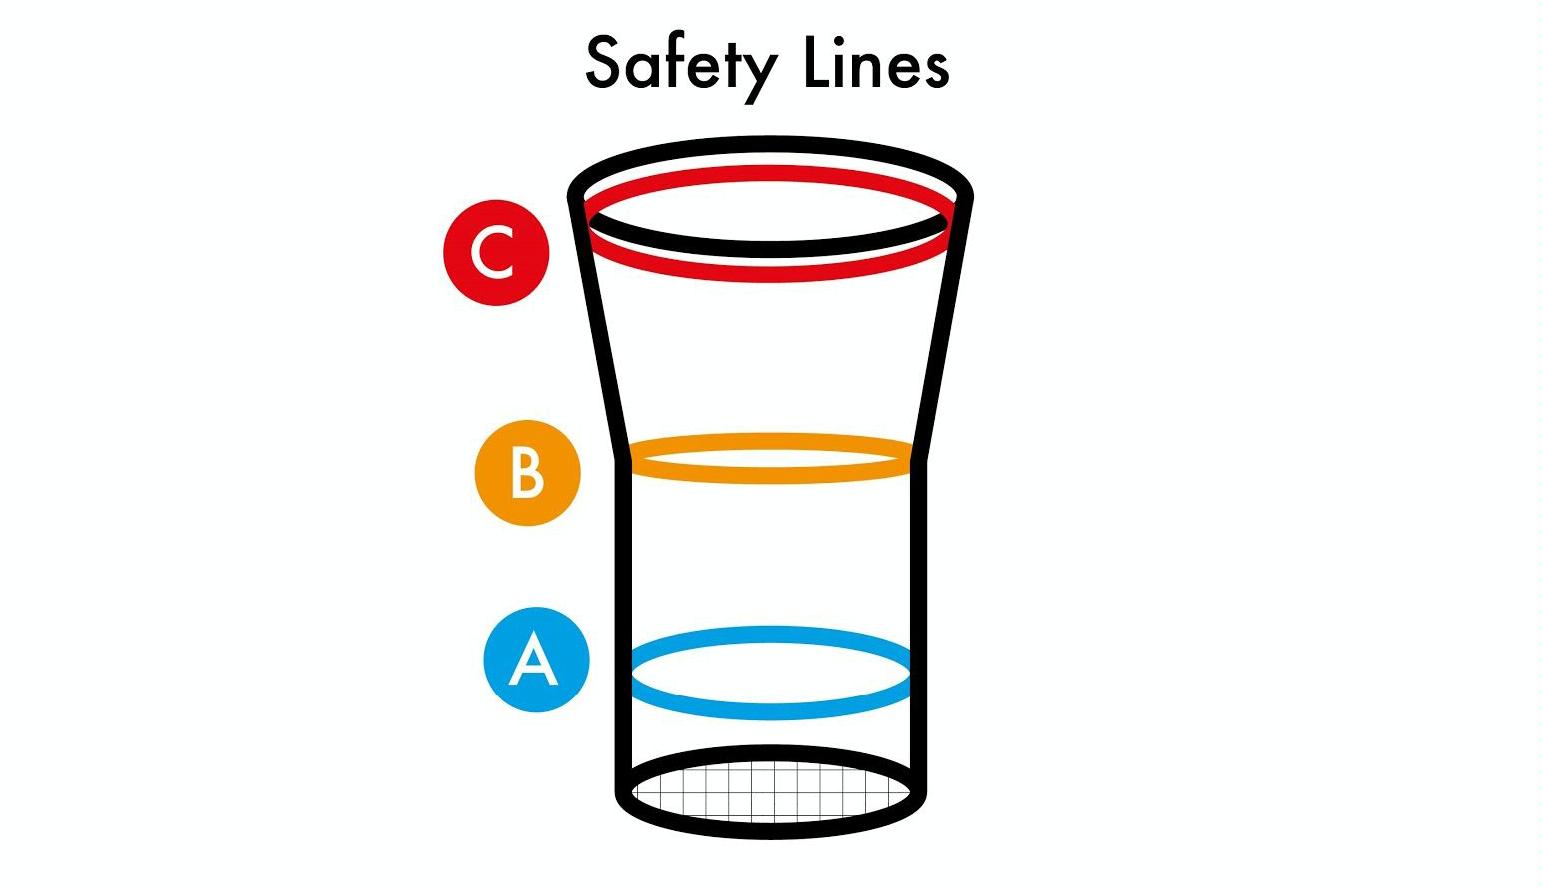 Image-4-Safety-Lines